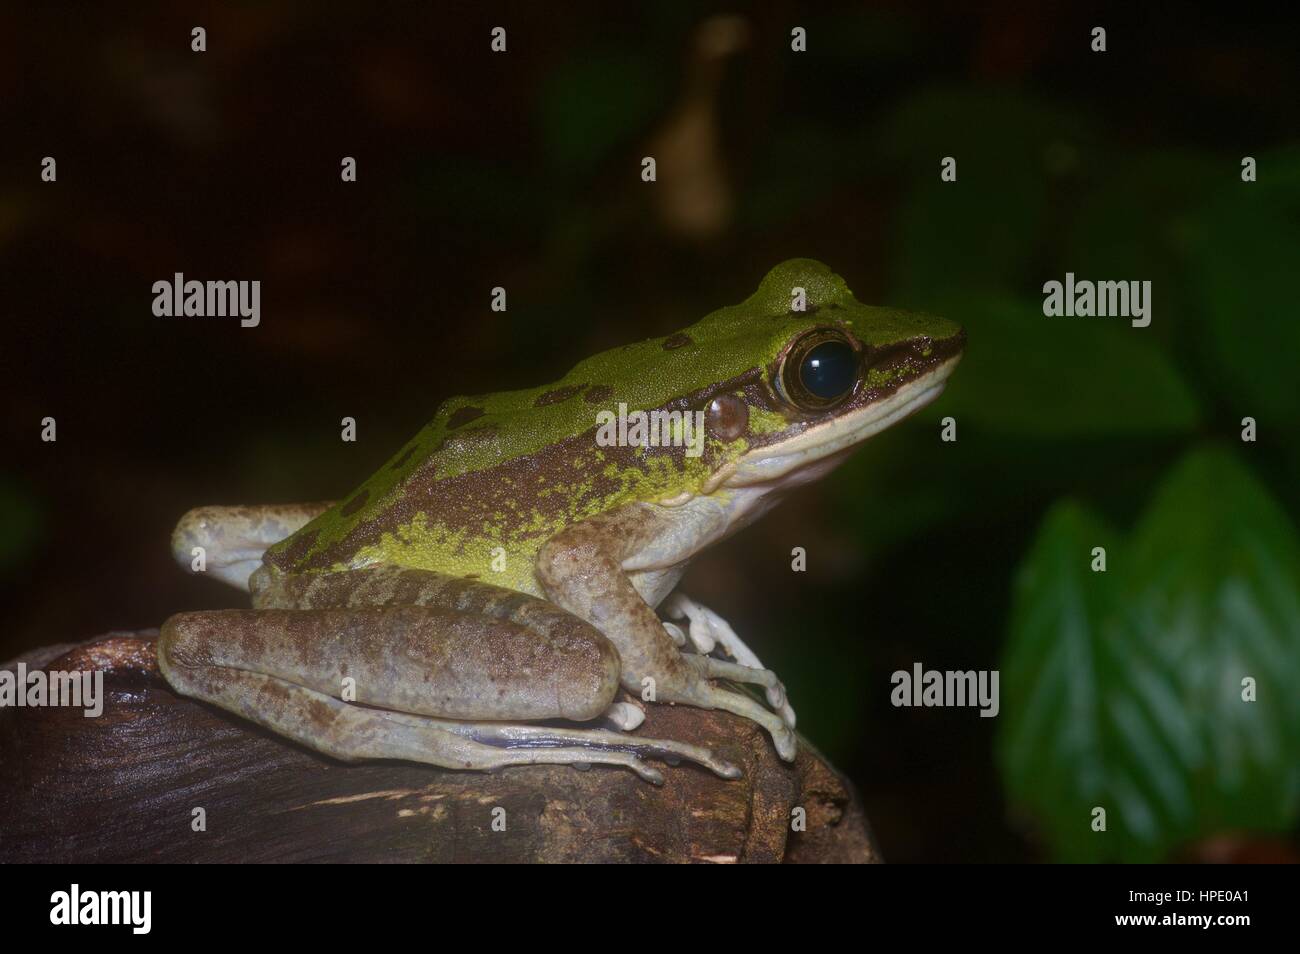 A Poisonous Rock Frog (Odorrana hosii) in the rainforest at Ulu Yam, Selangor, Malaysia Stock Photo